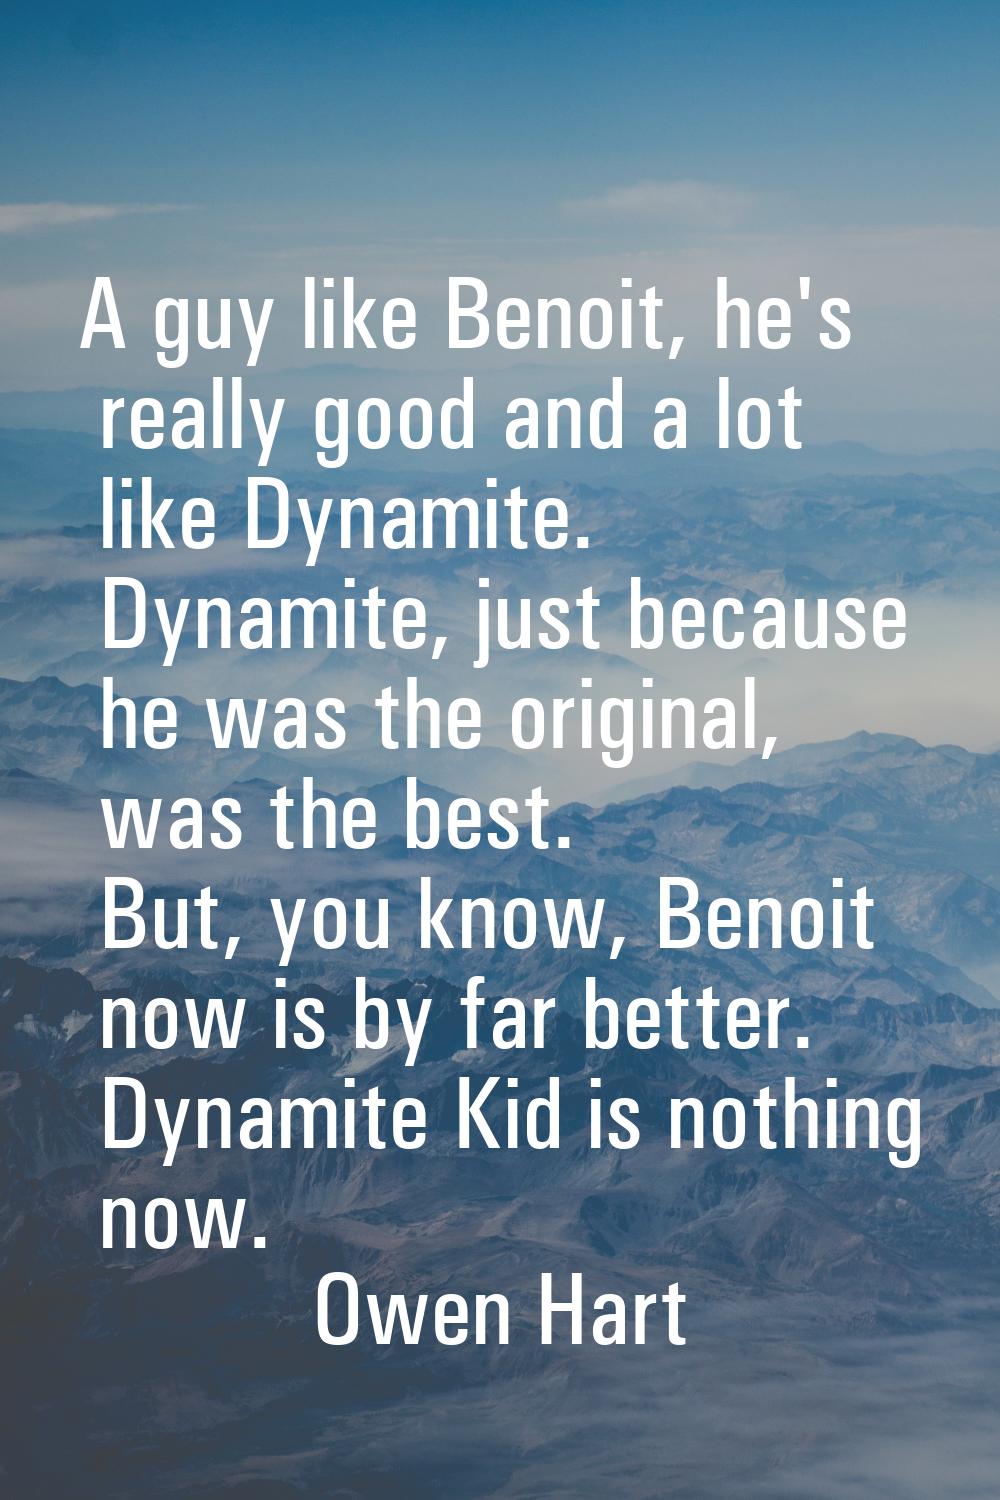 A guy like Benoit, he's really good and a lot like Dynamite. Dynamite, just because he was the orig